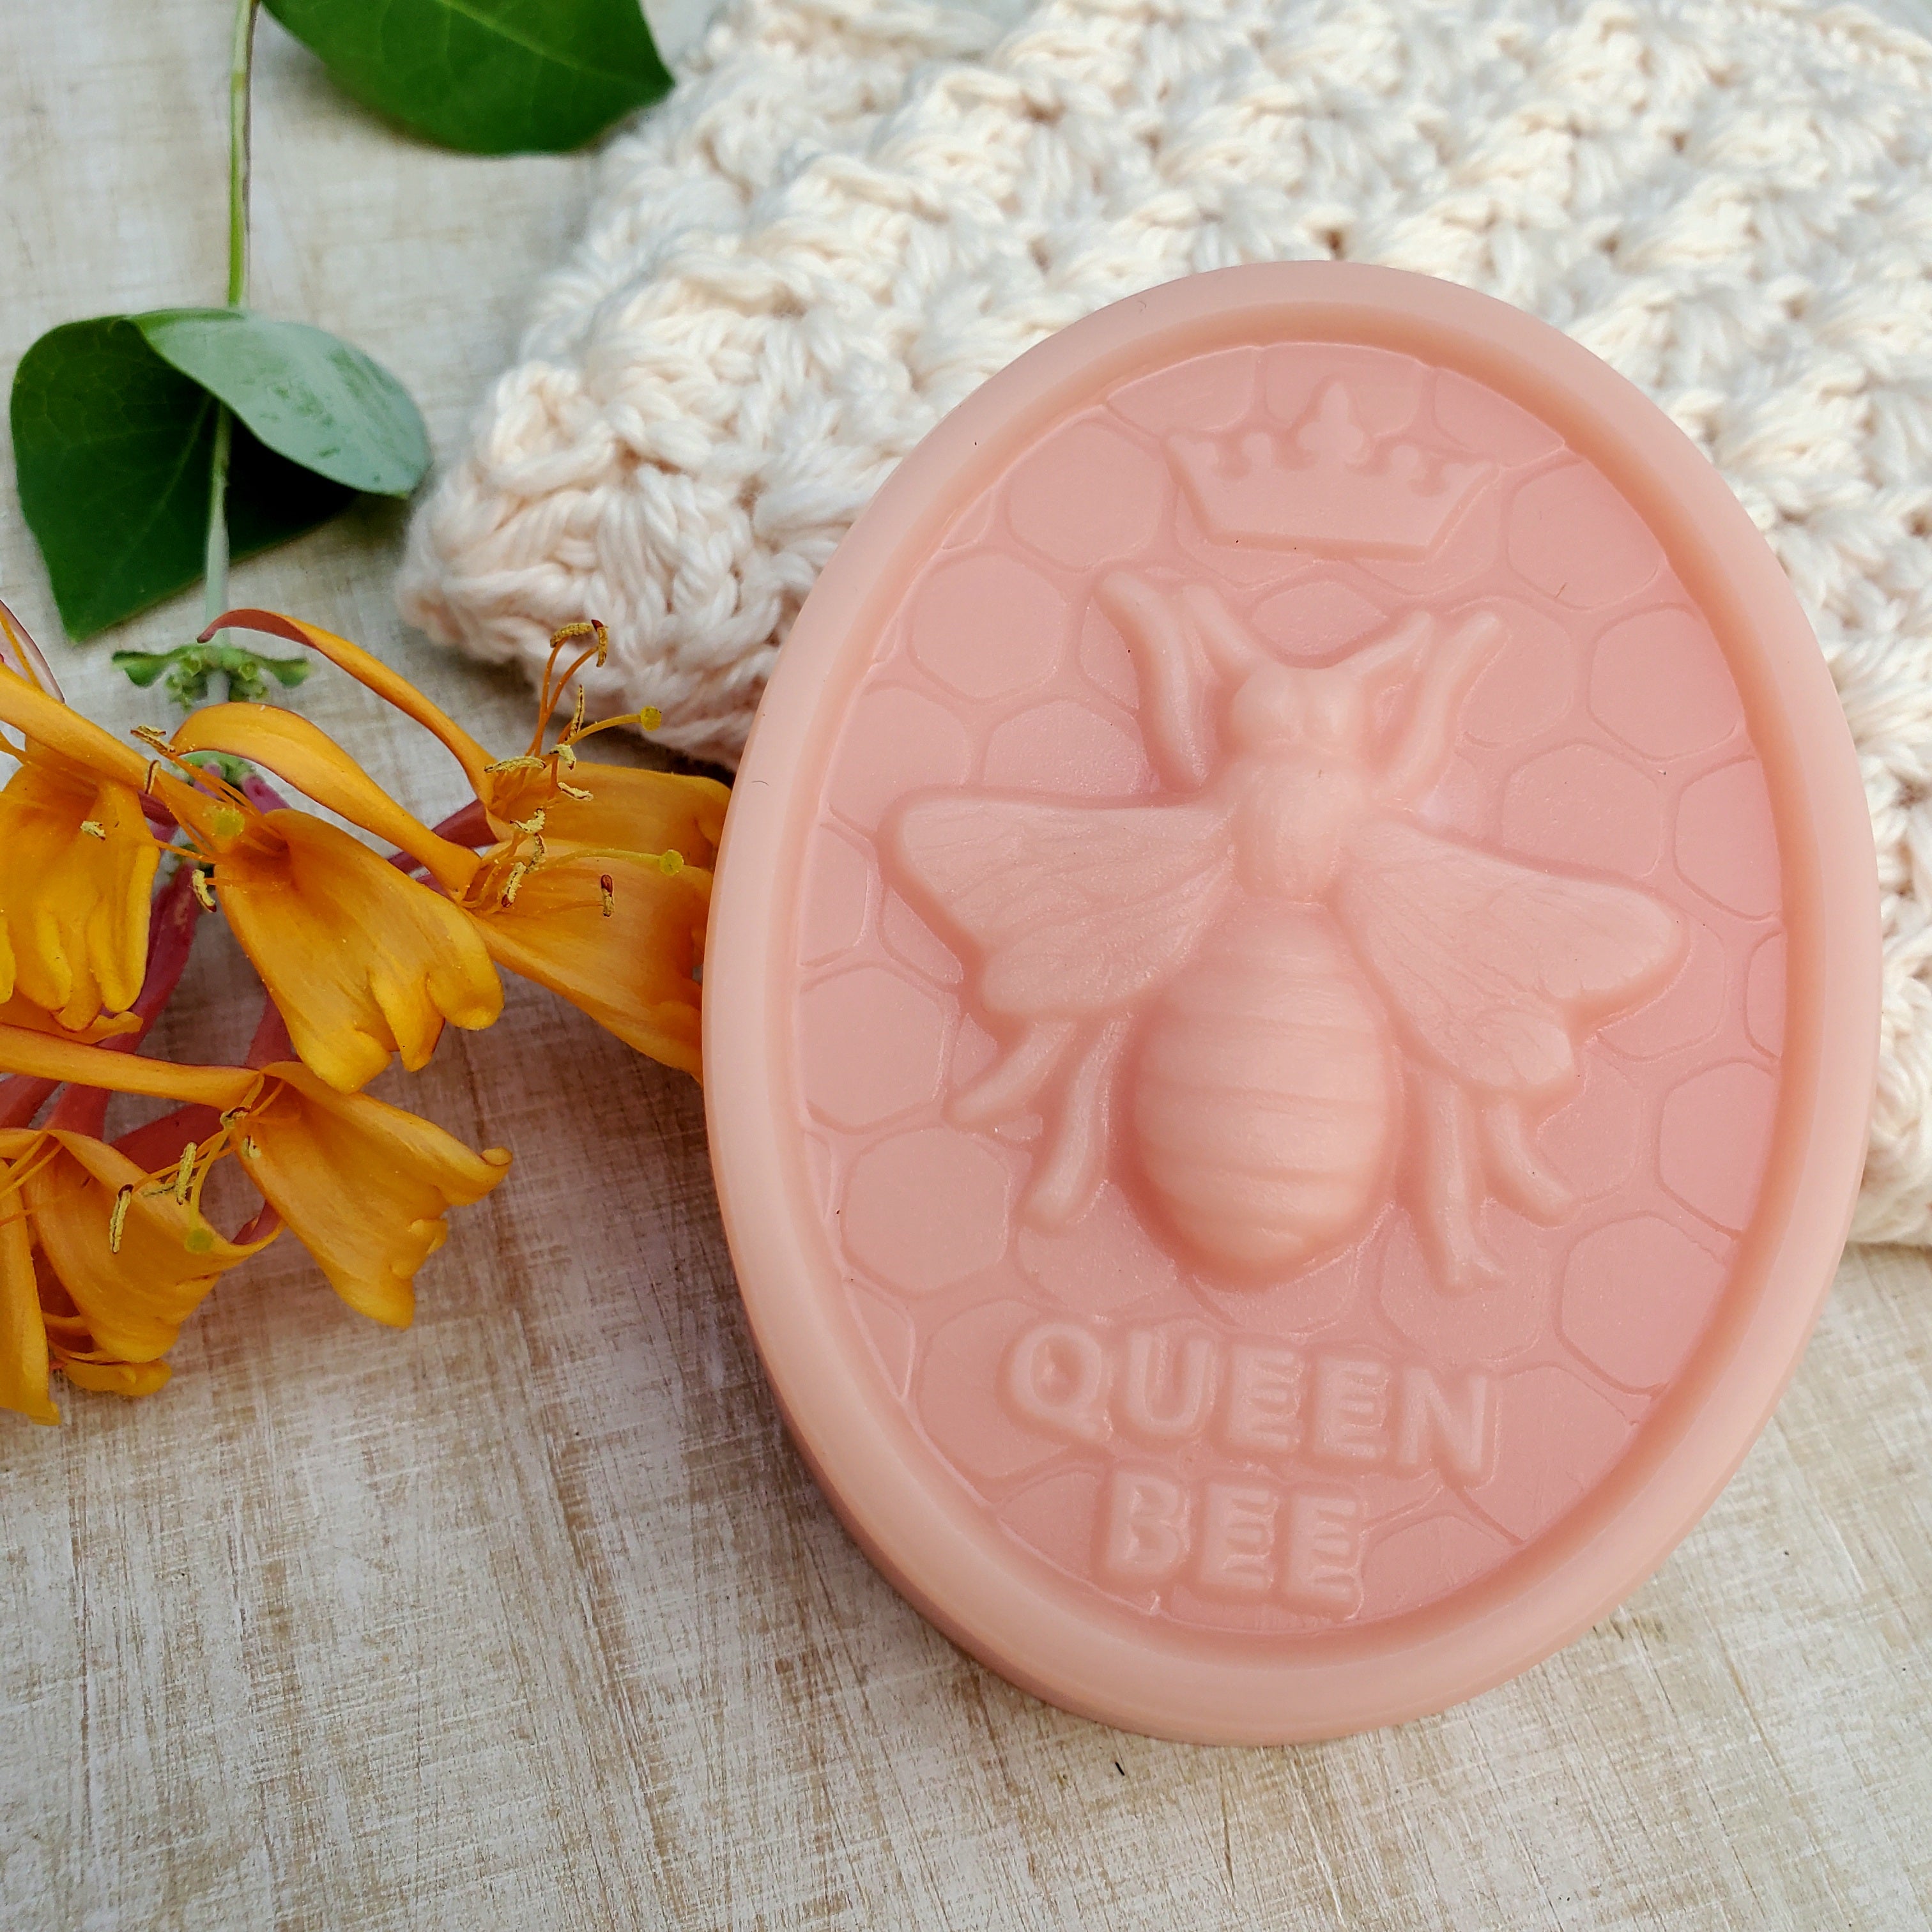 Queen Bee - Honey & Olive Oil with Mango, Shea and Cocoa Butters – Bee  Happy Farmhouse